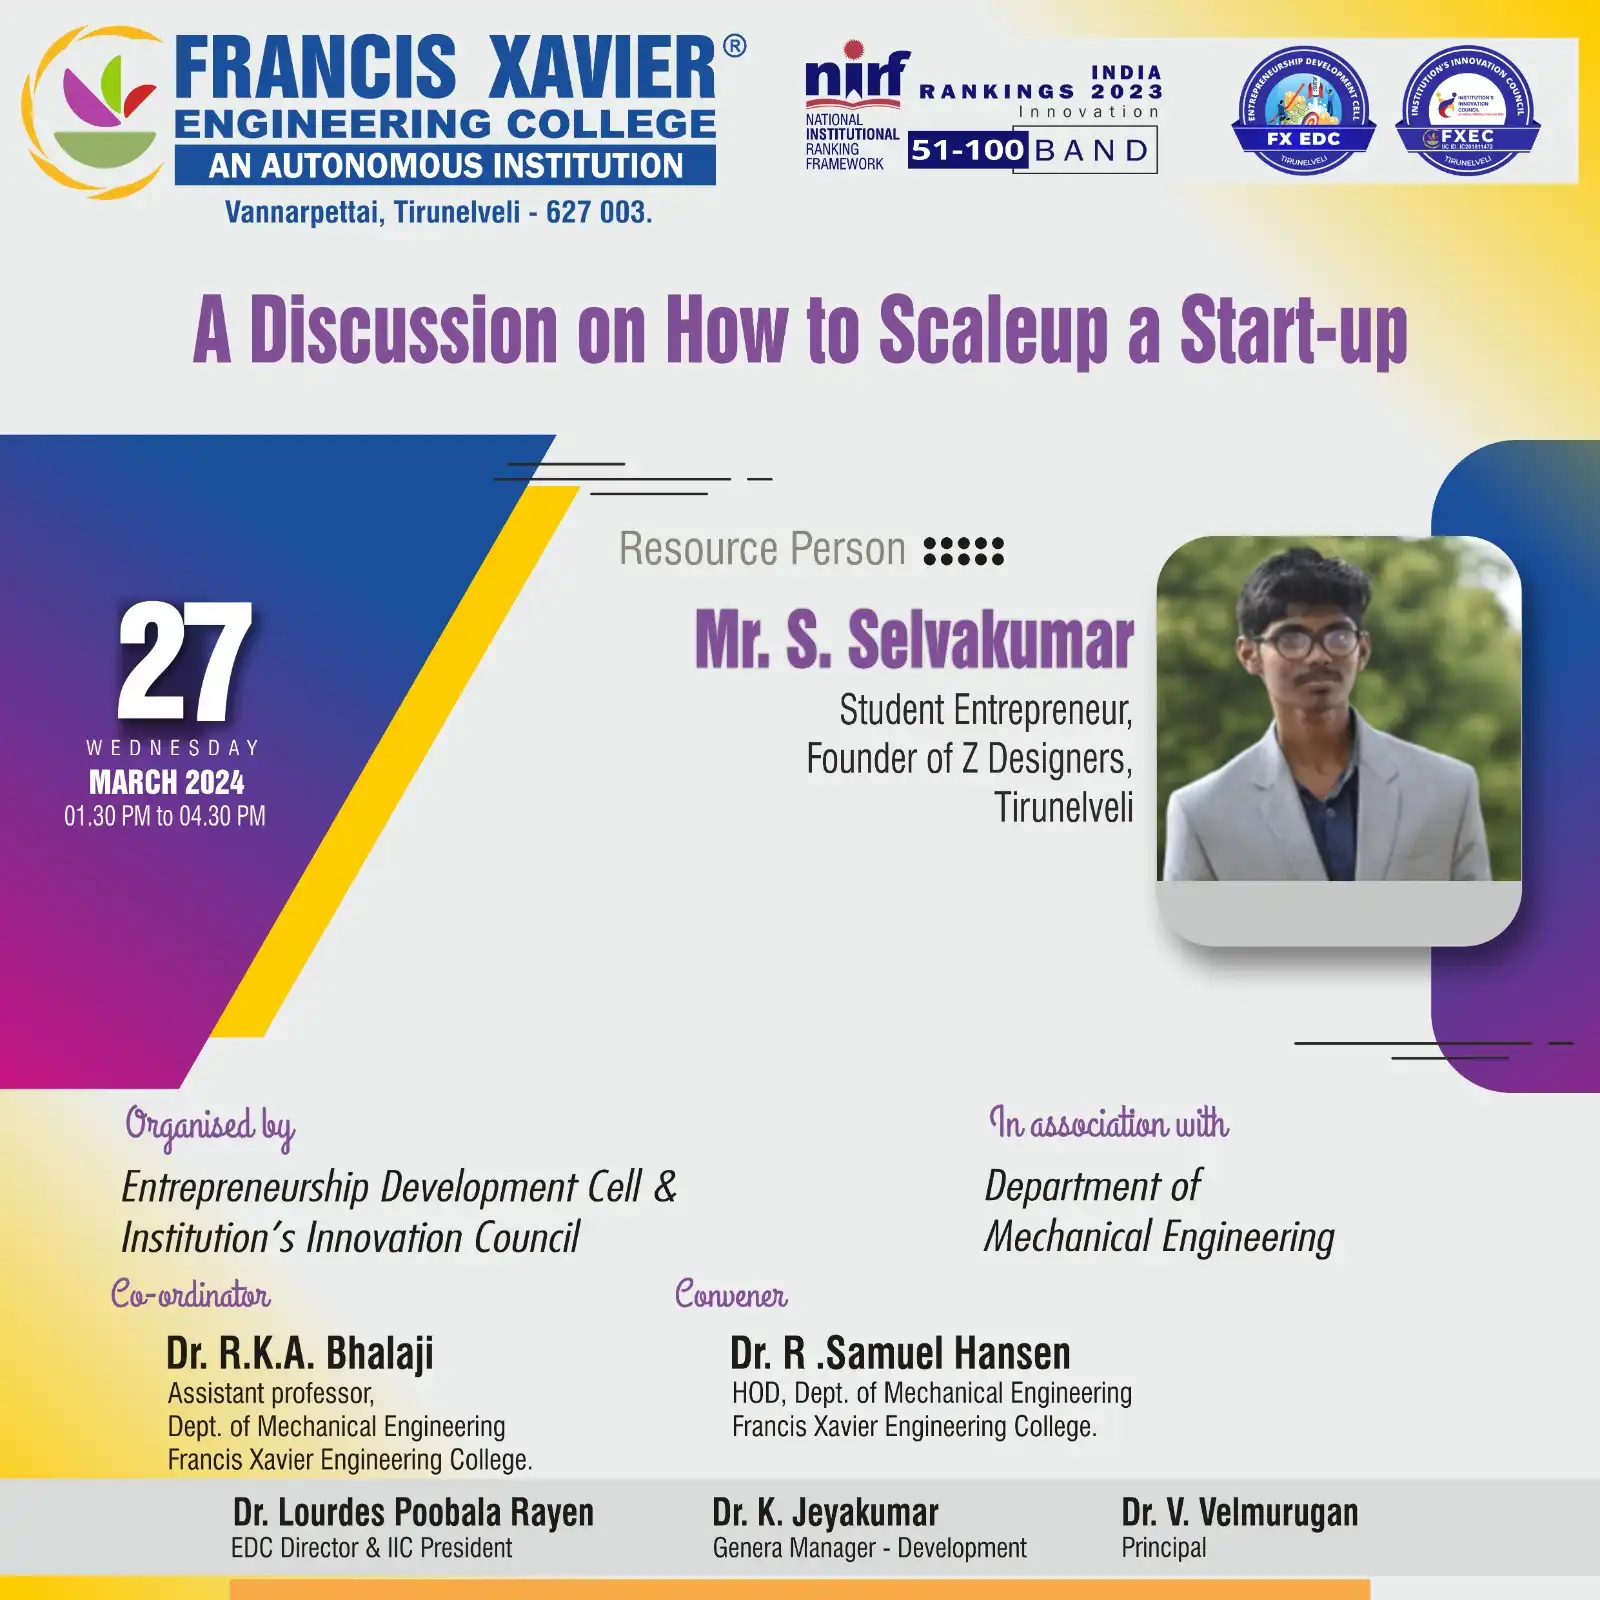 A Discussion on How to Scaleup a Start-up